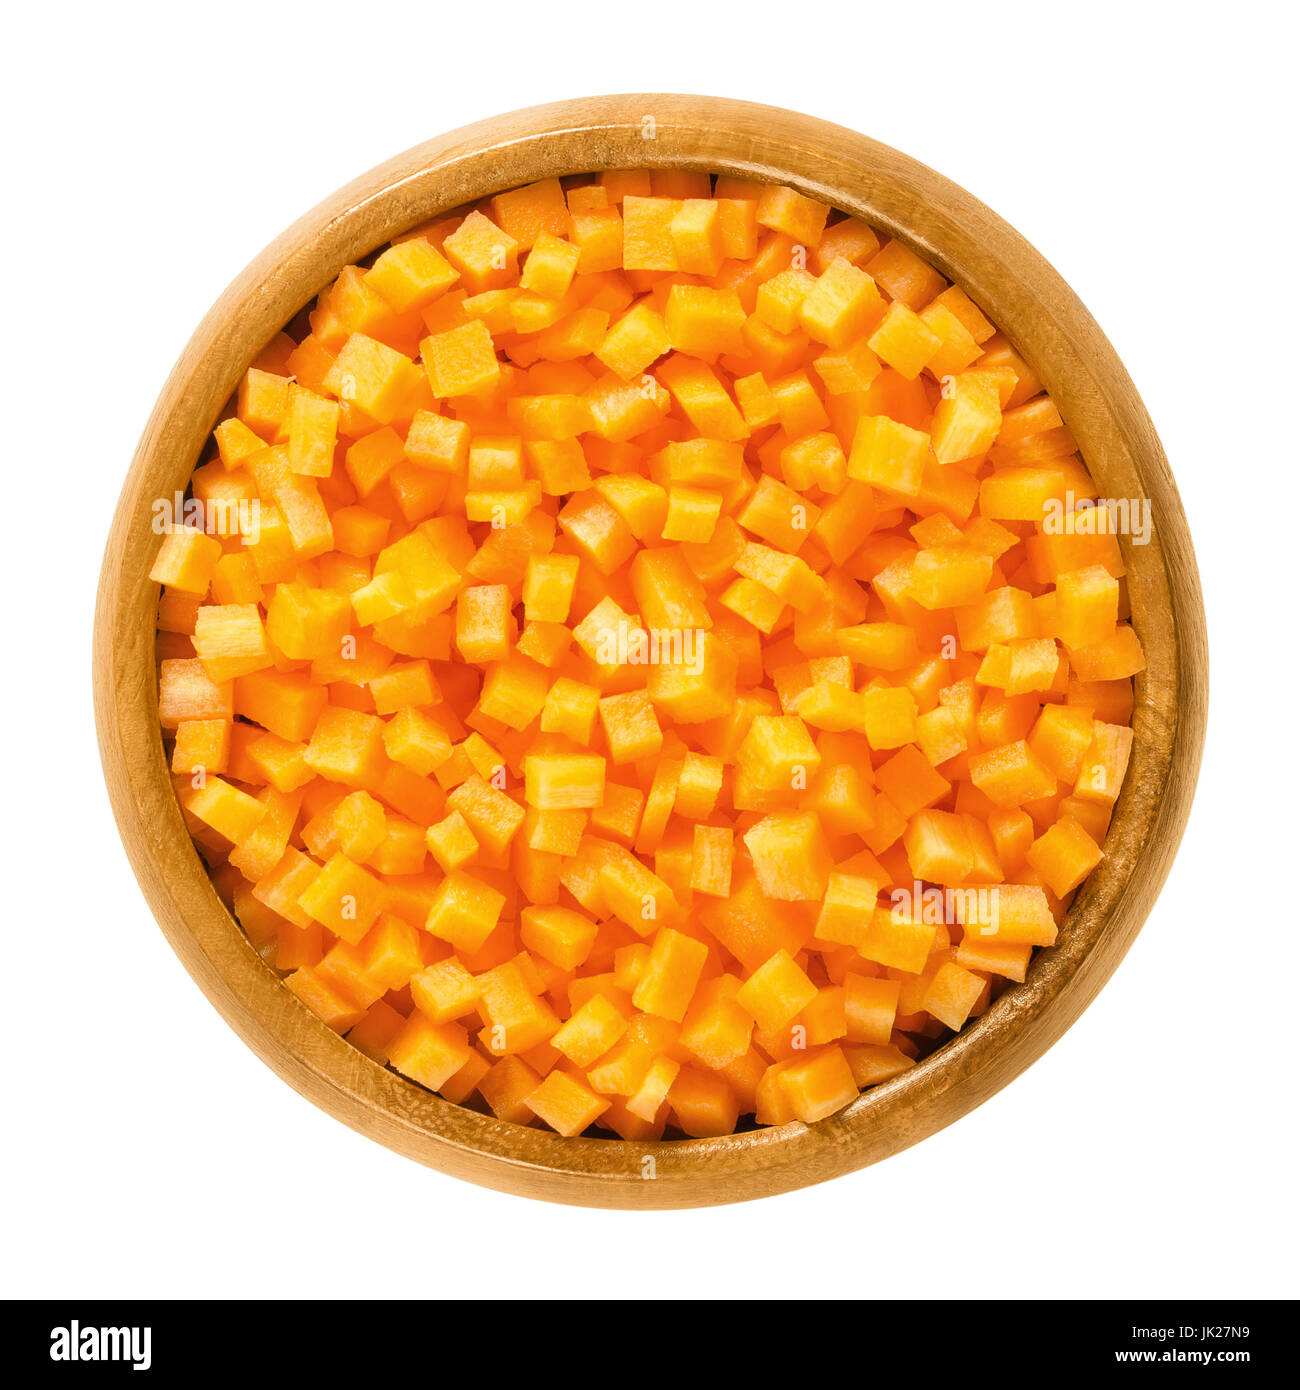 Carrot cubes in wooden bowl. Fresh cut crisp pieces of Daucus carota, a root vegetable with orange color. Edible taproot. Isolated macro food photo. Stock Photo